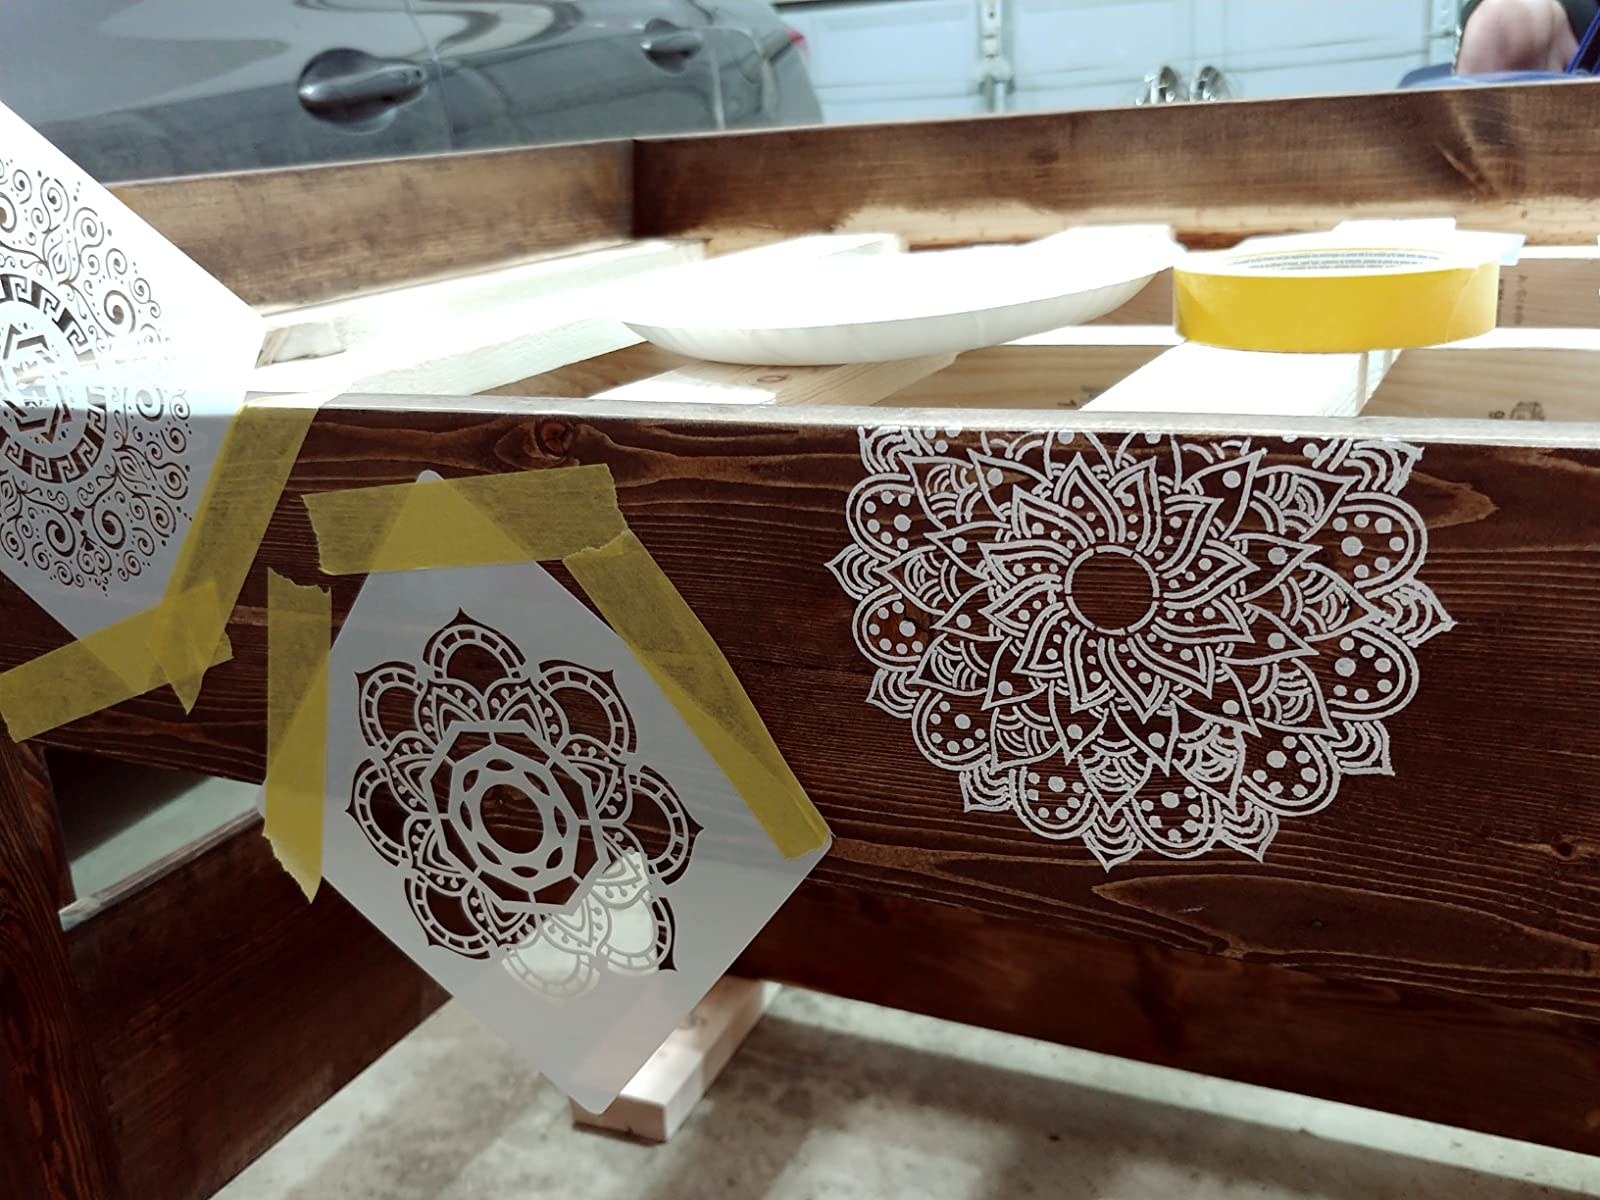 reviewer image of stencils taped onto a wooden table